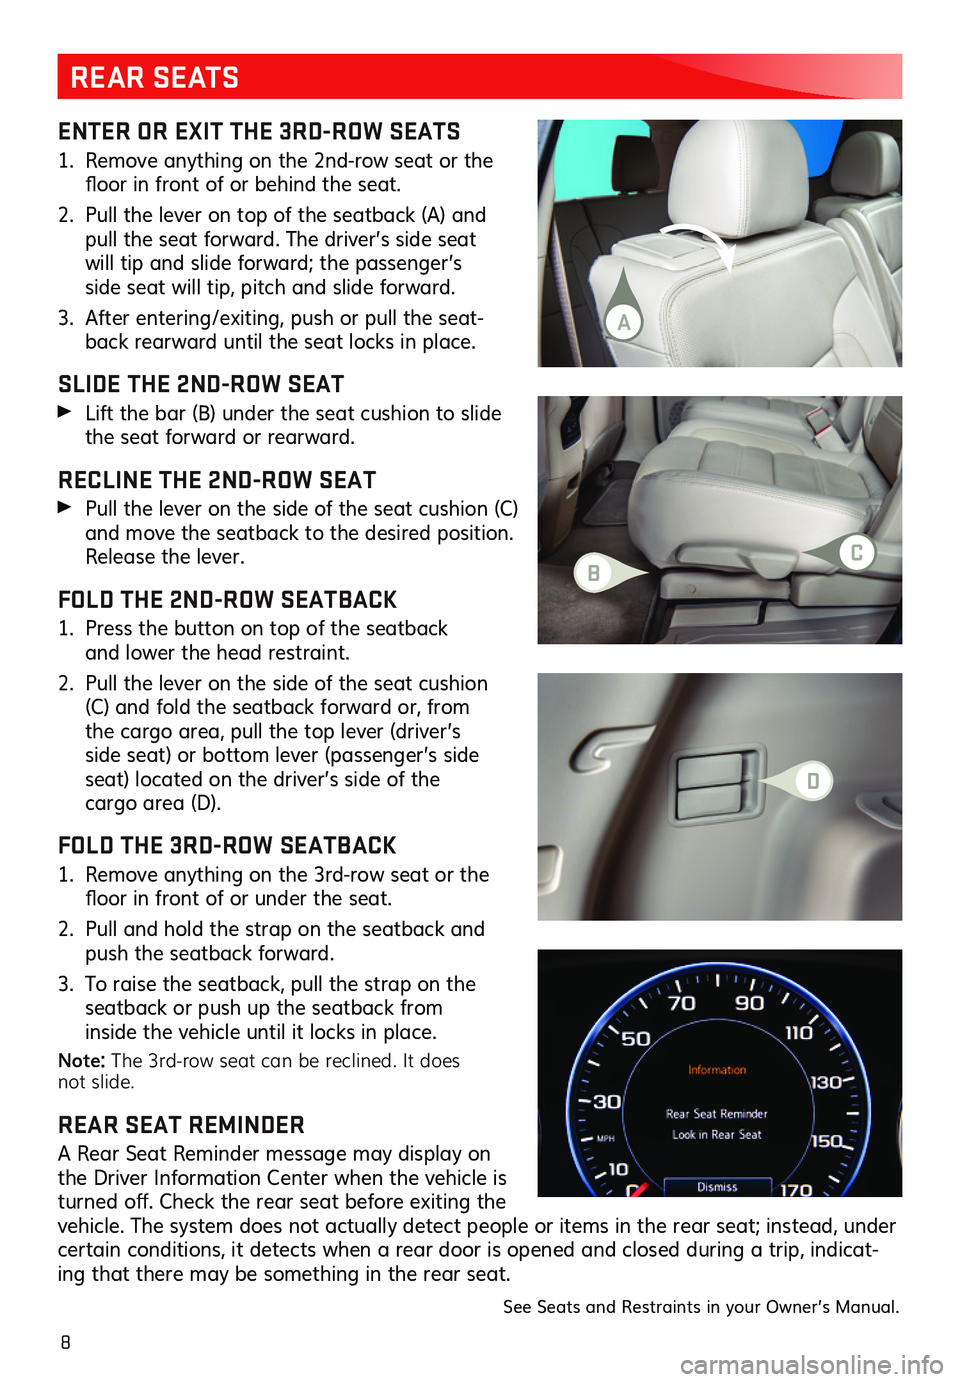 GMC ACADIA 2020  Get To Know Guide 8
ENTER OR EXIT THE 3RD-ROW SEATS
1. Remove anything on the 2nd-row seat or the floor  in front  of or  behind  the seat.  
2. Pull the lever on top of the seatback (A) and pull the seat forwa